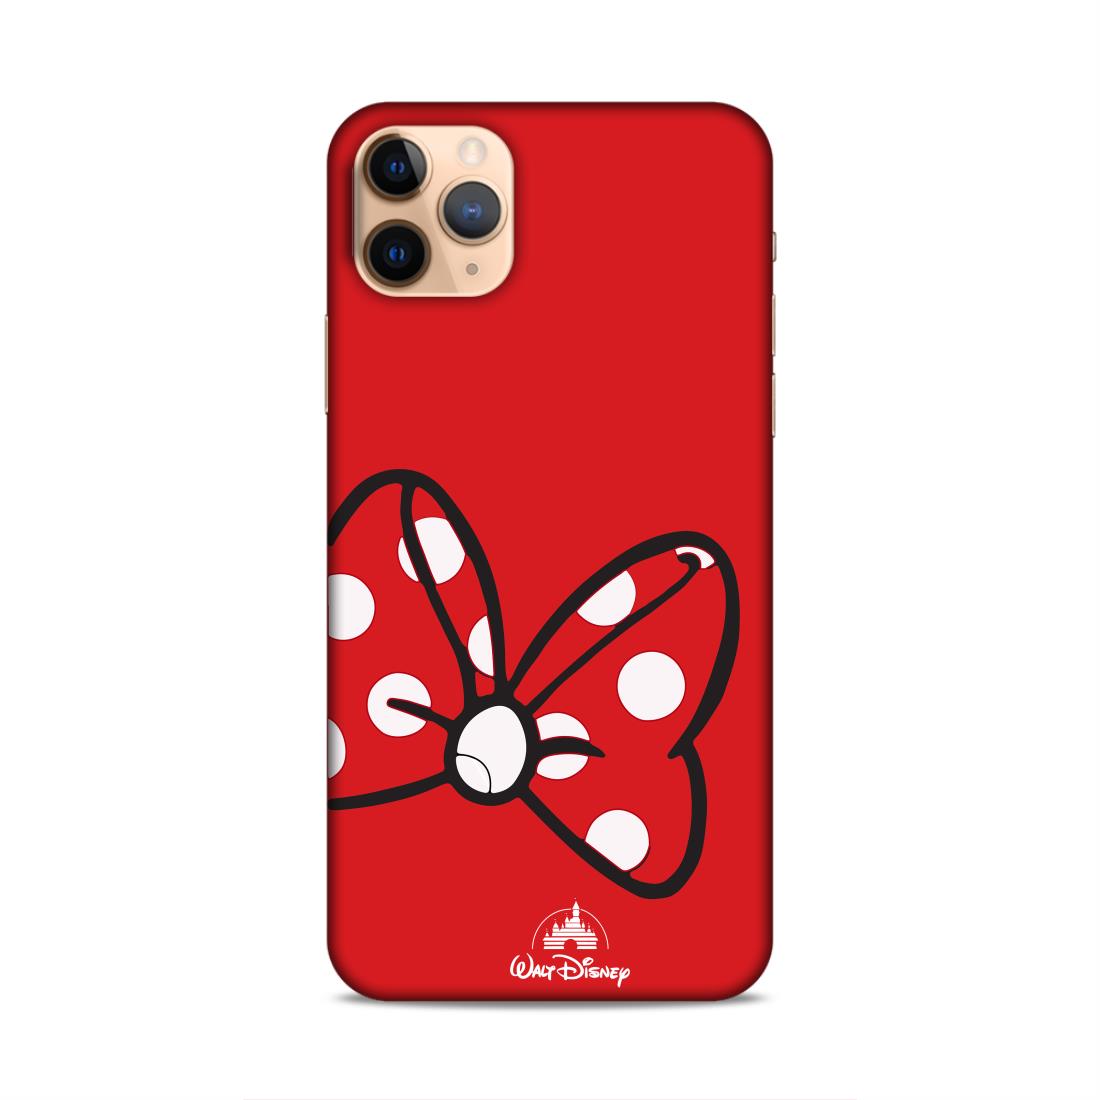 Minnie Polka Dots Hard Back Case For Apple iPhone 11 Pro